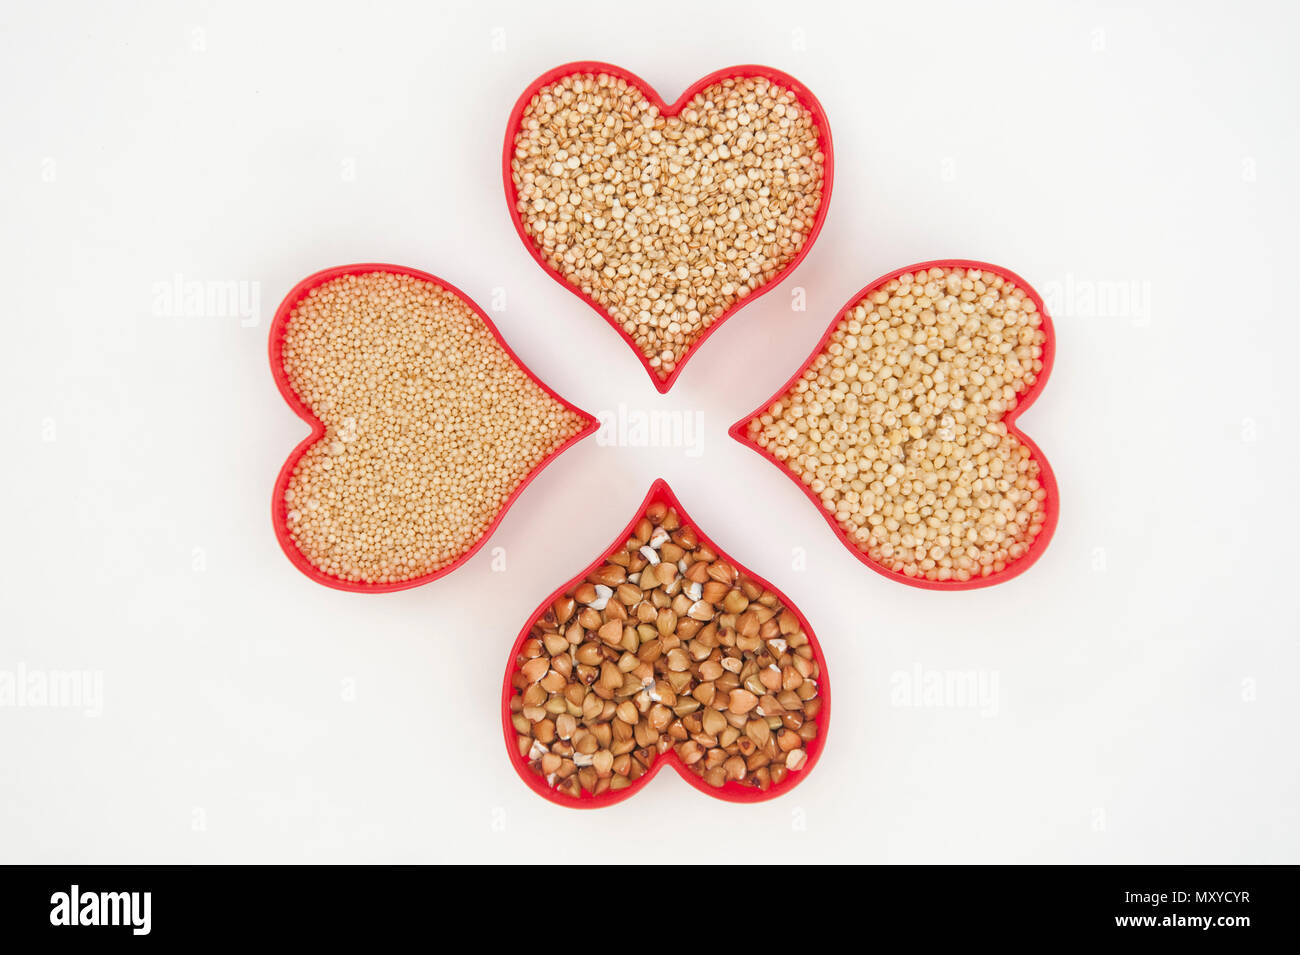 Four hearts filled with super seeds amaranth, millet, buckwheat and quinoa isolated on white Stock Photo